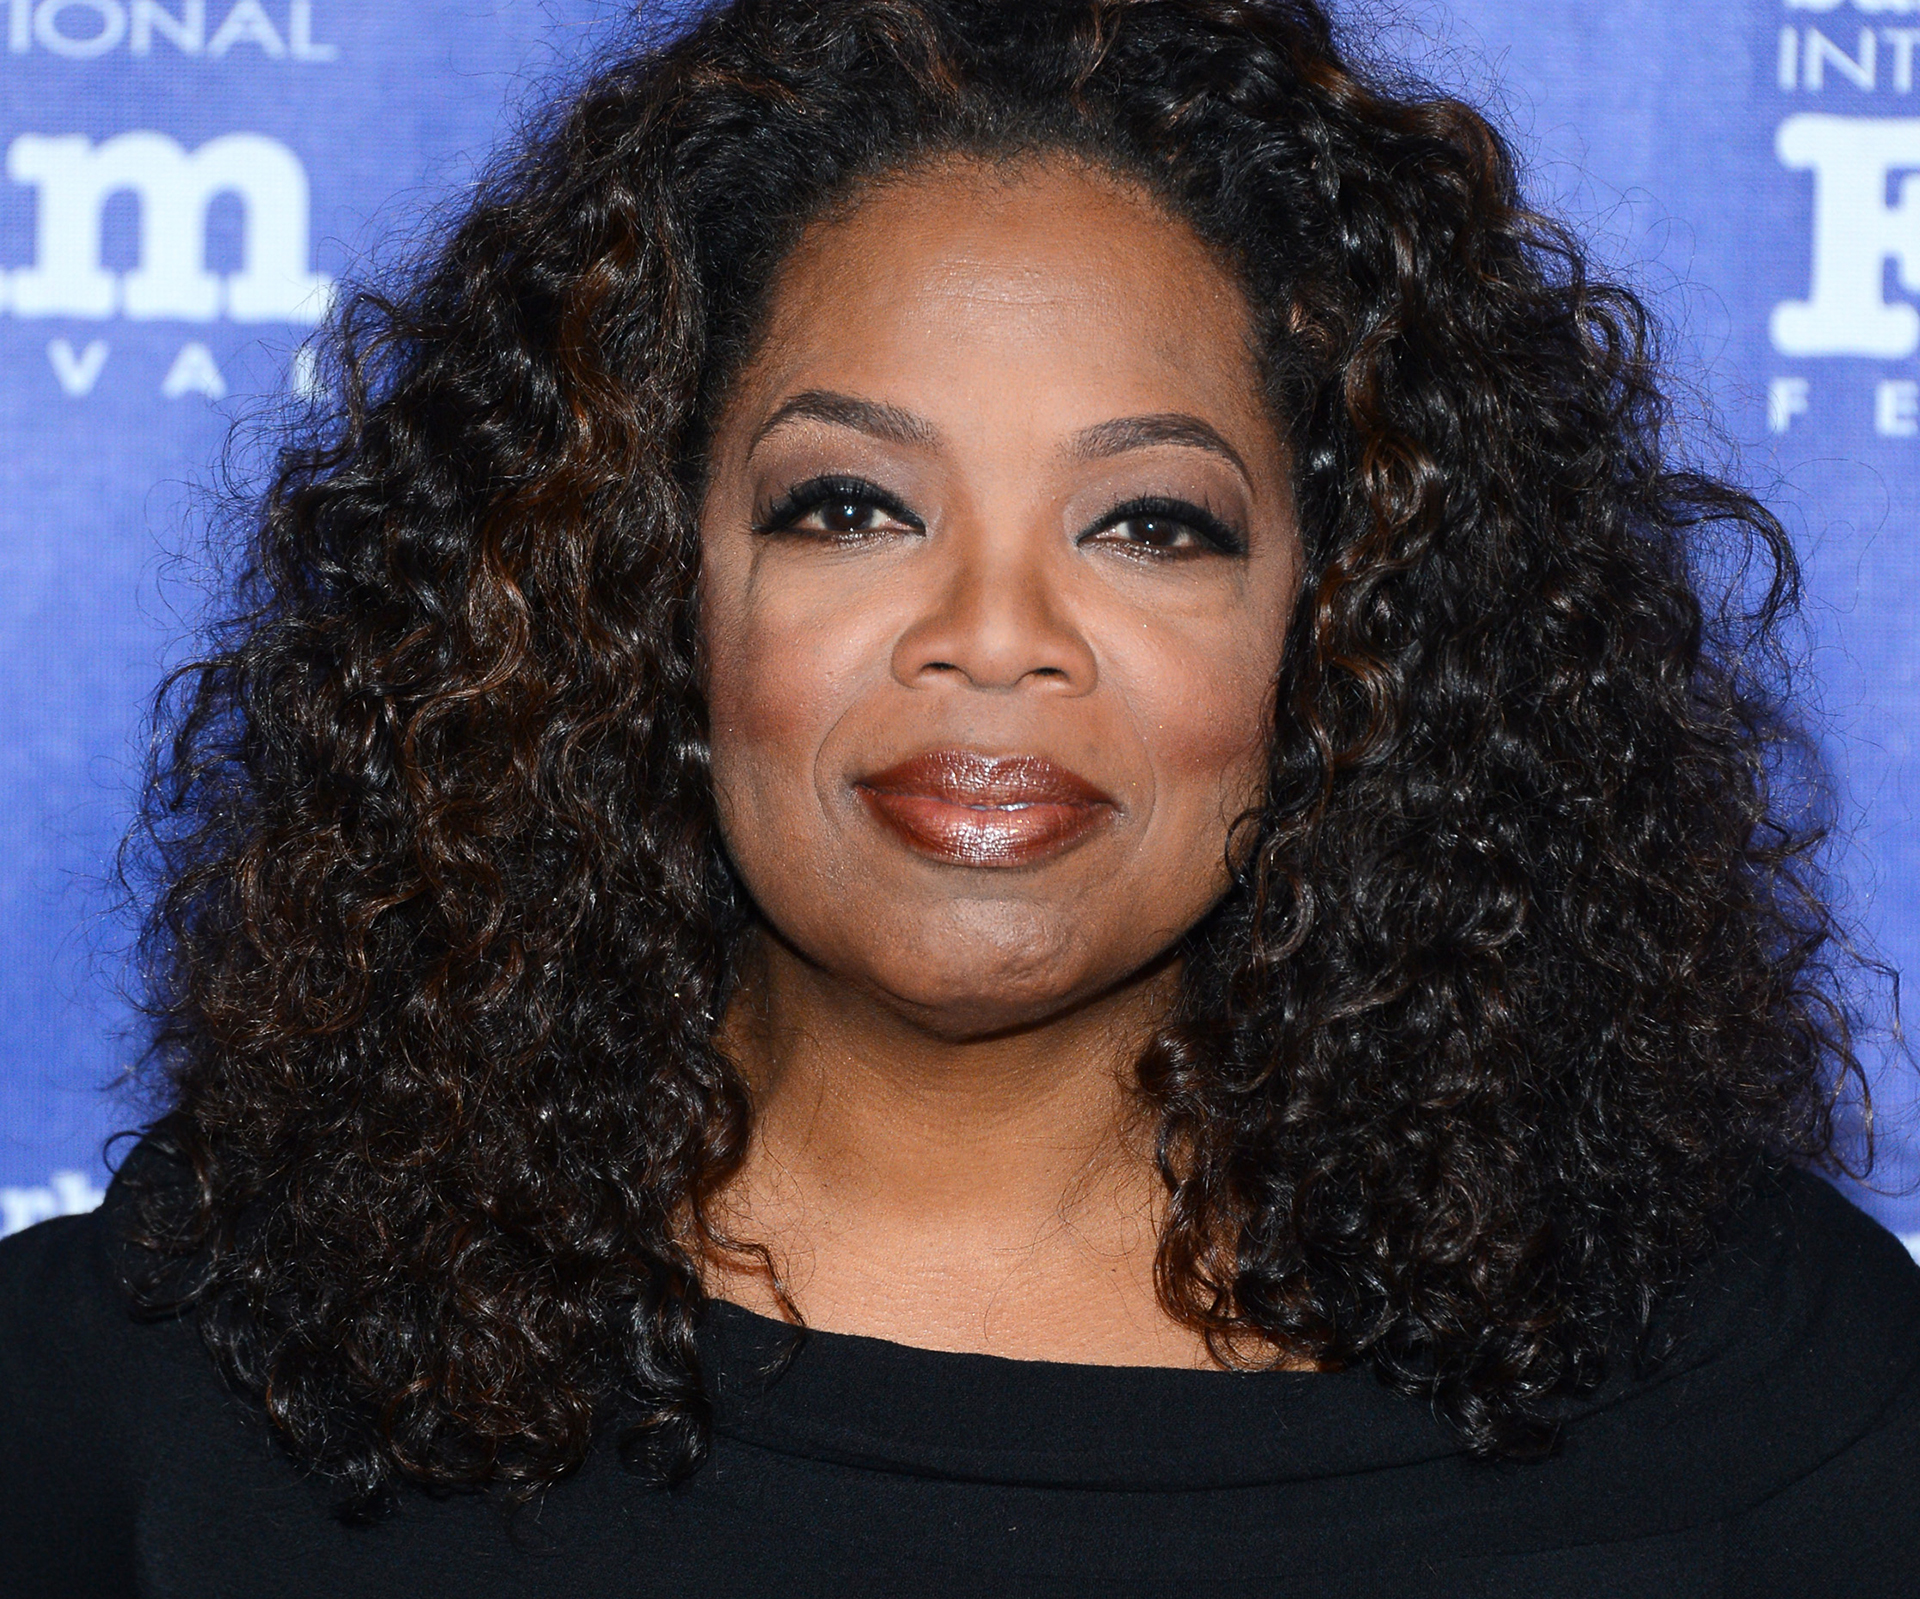 Oprah Winfrey finally reveals the name of the baby boy she lost at 14